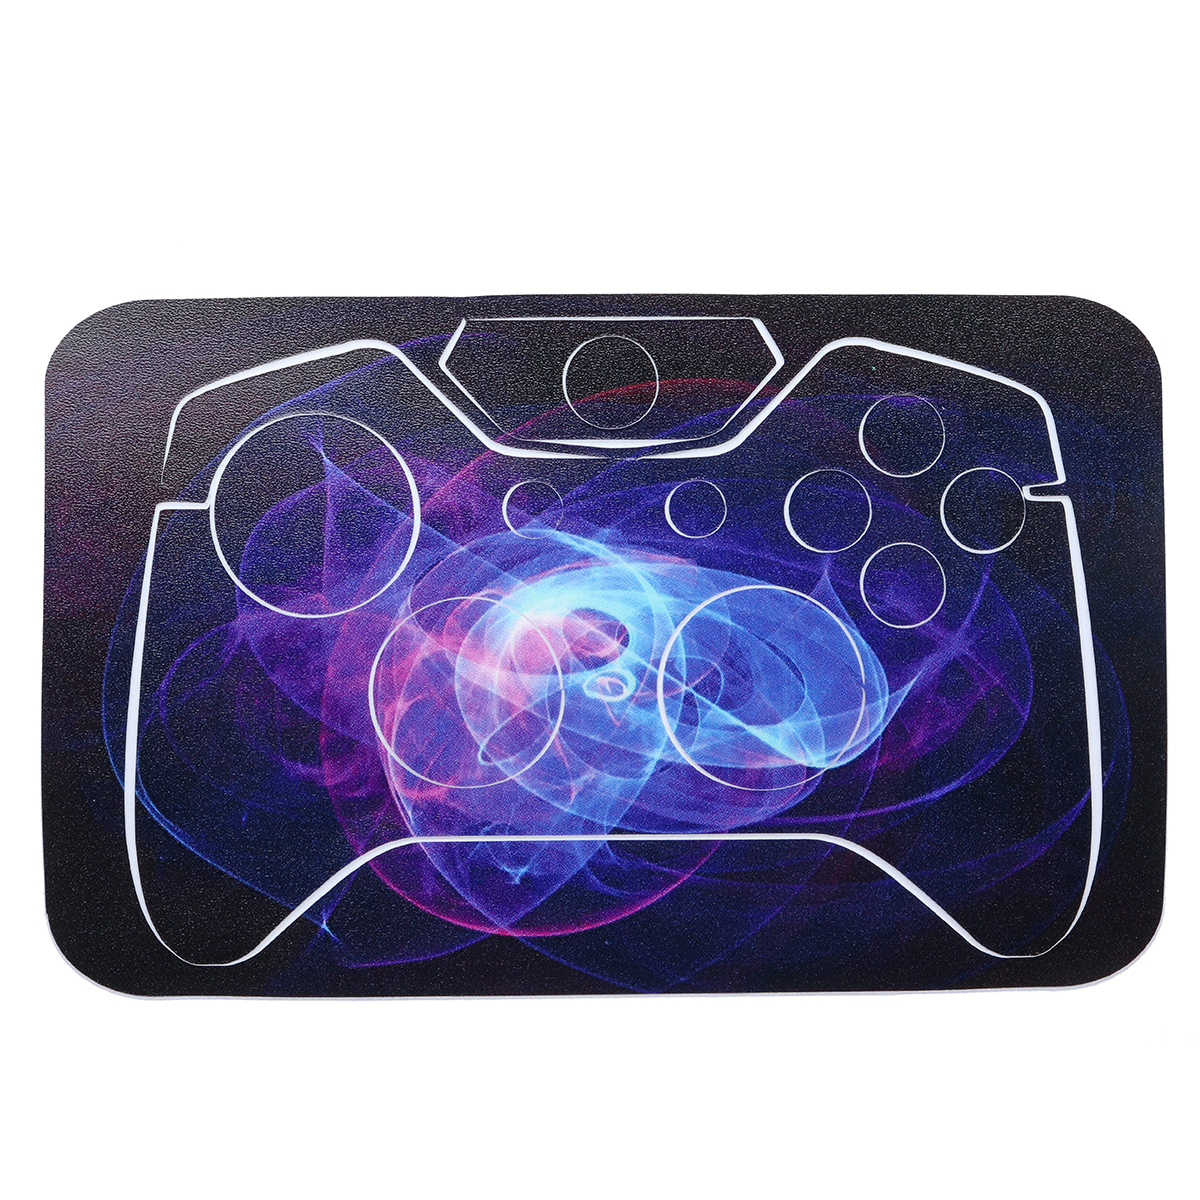 Purple Protective Vinyl Decal Skin Stickers Wrap Cover For Xbox One Game Console Game Controller Kinect 30